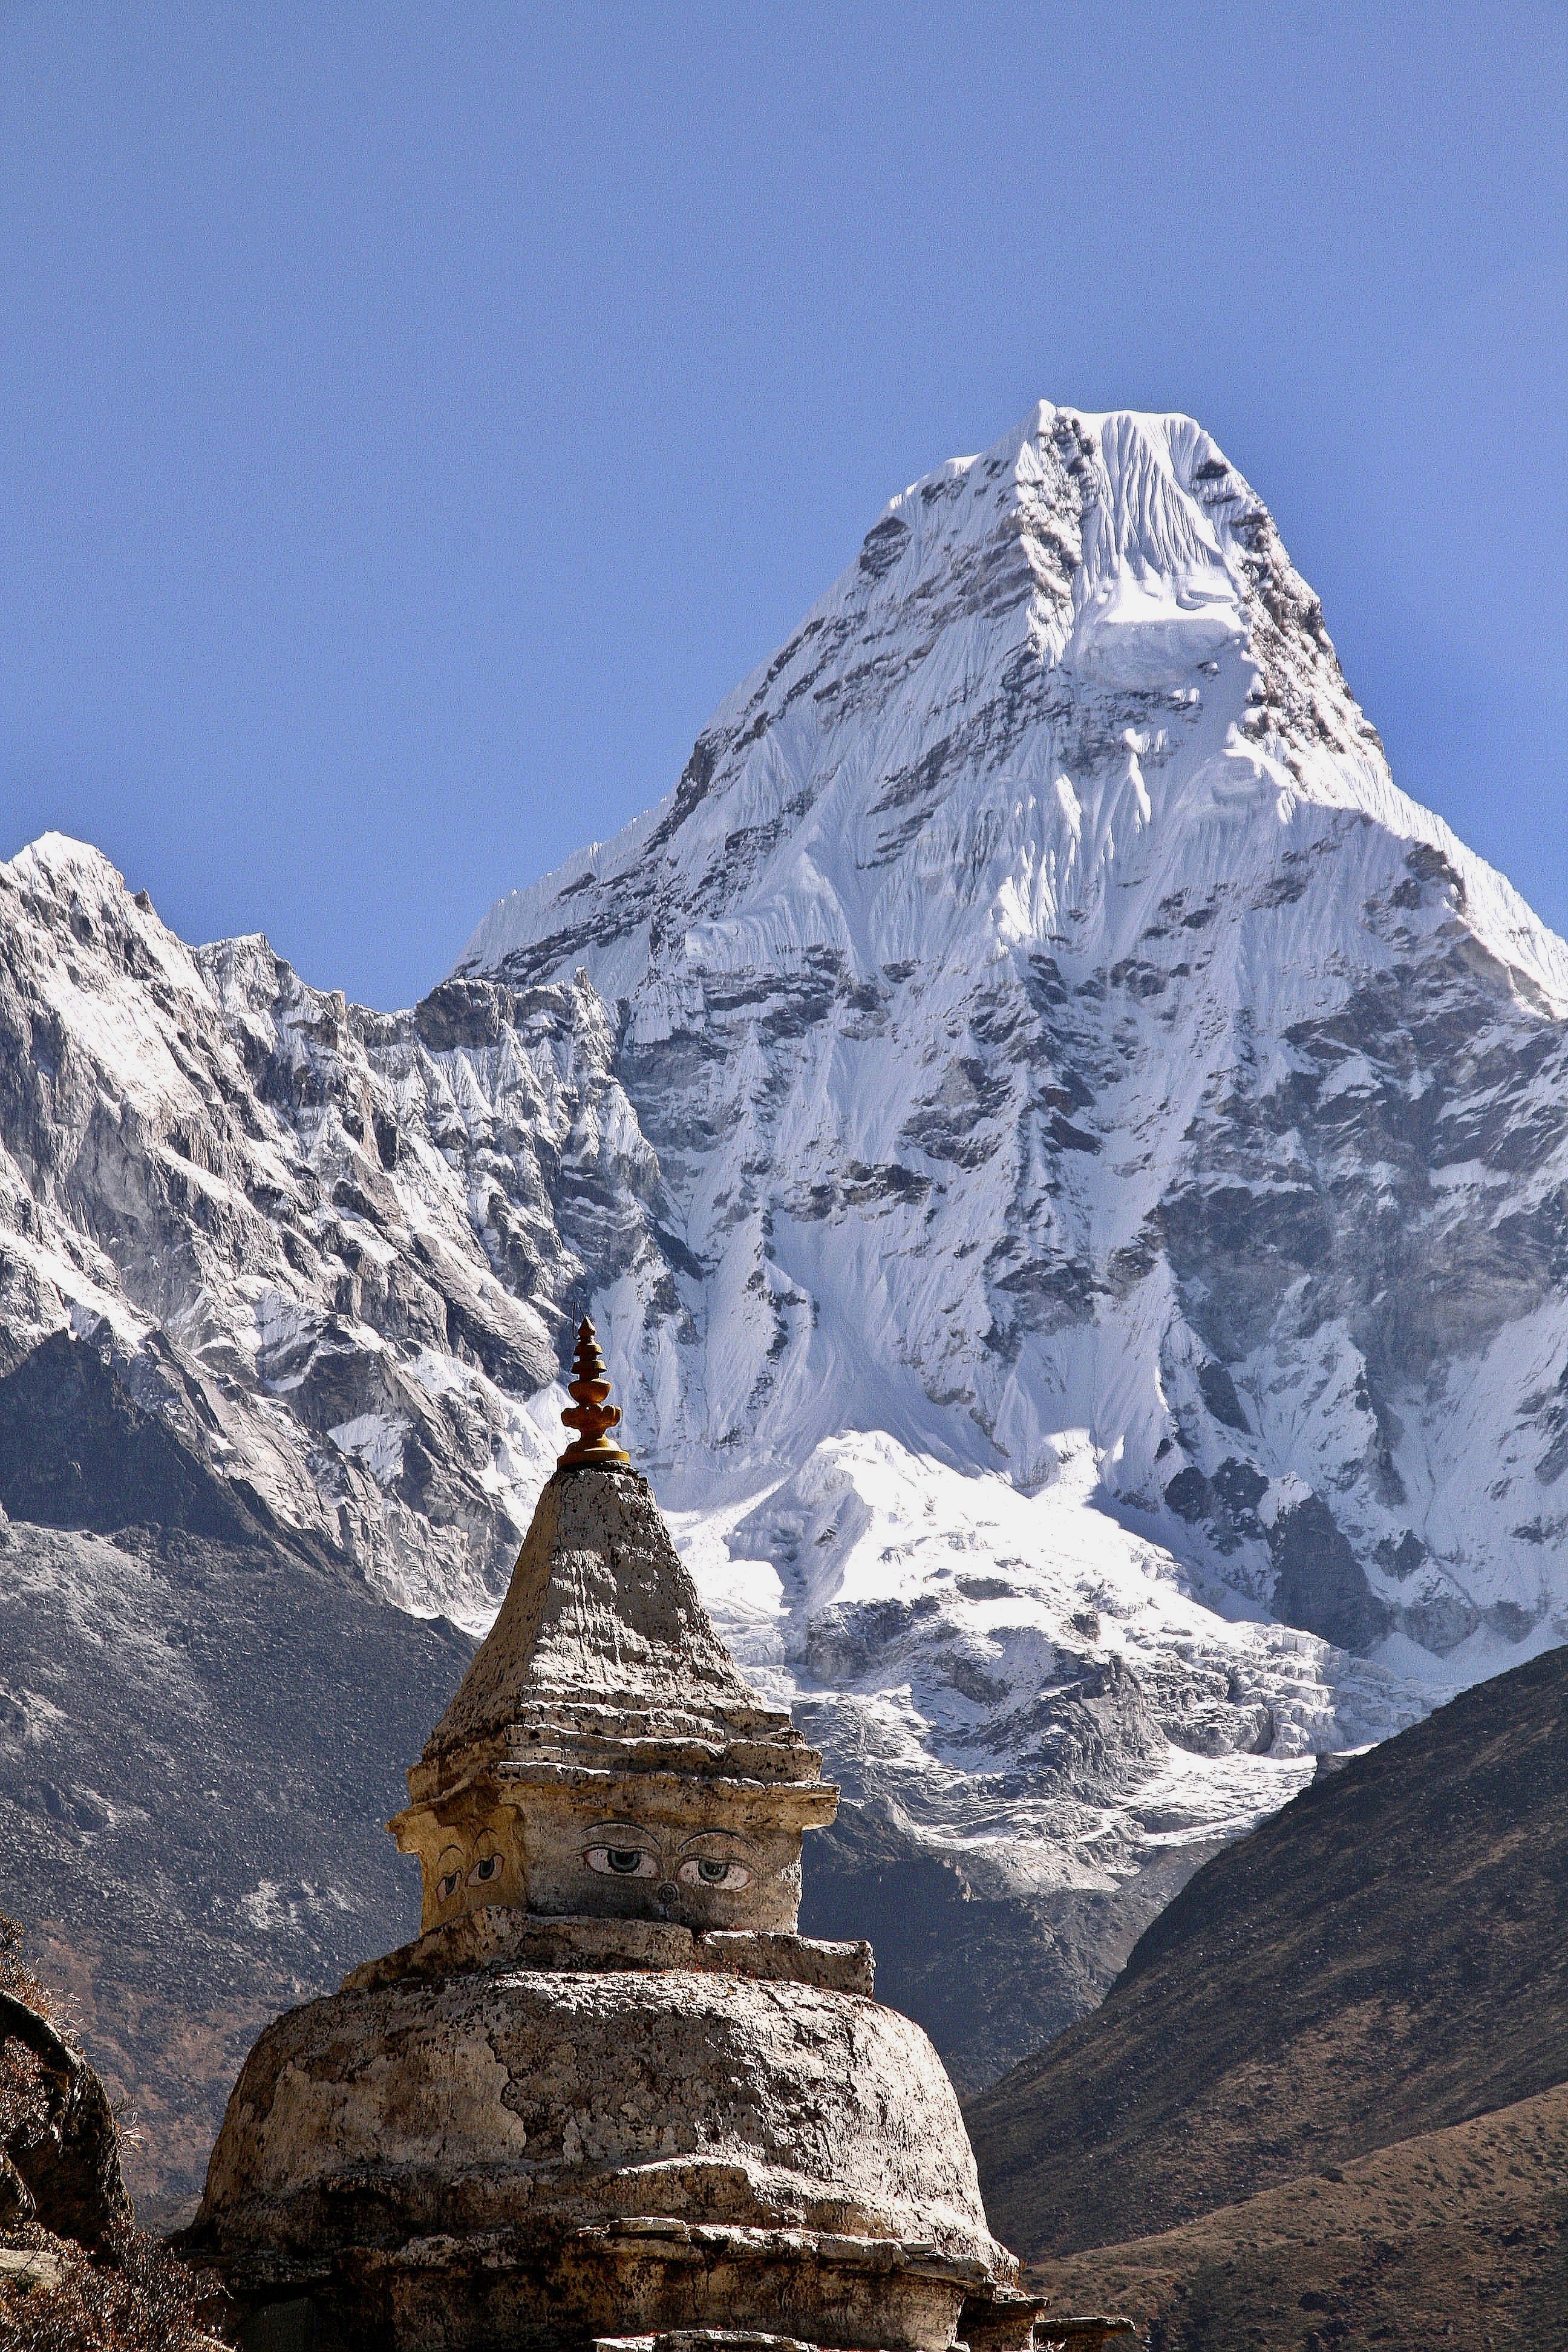 Mountain Kingdoms to Chris Holland for this superb image of Ama Dablam taken in the Everest region of Nepal final monthly winner in our 2021 Travel Photo